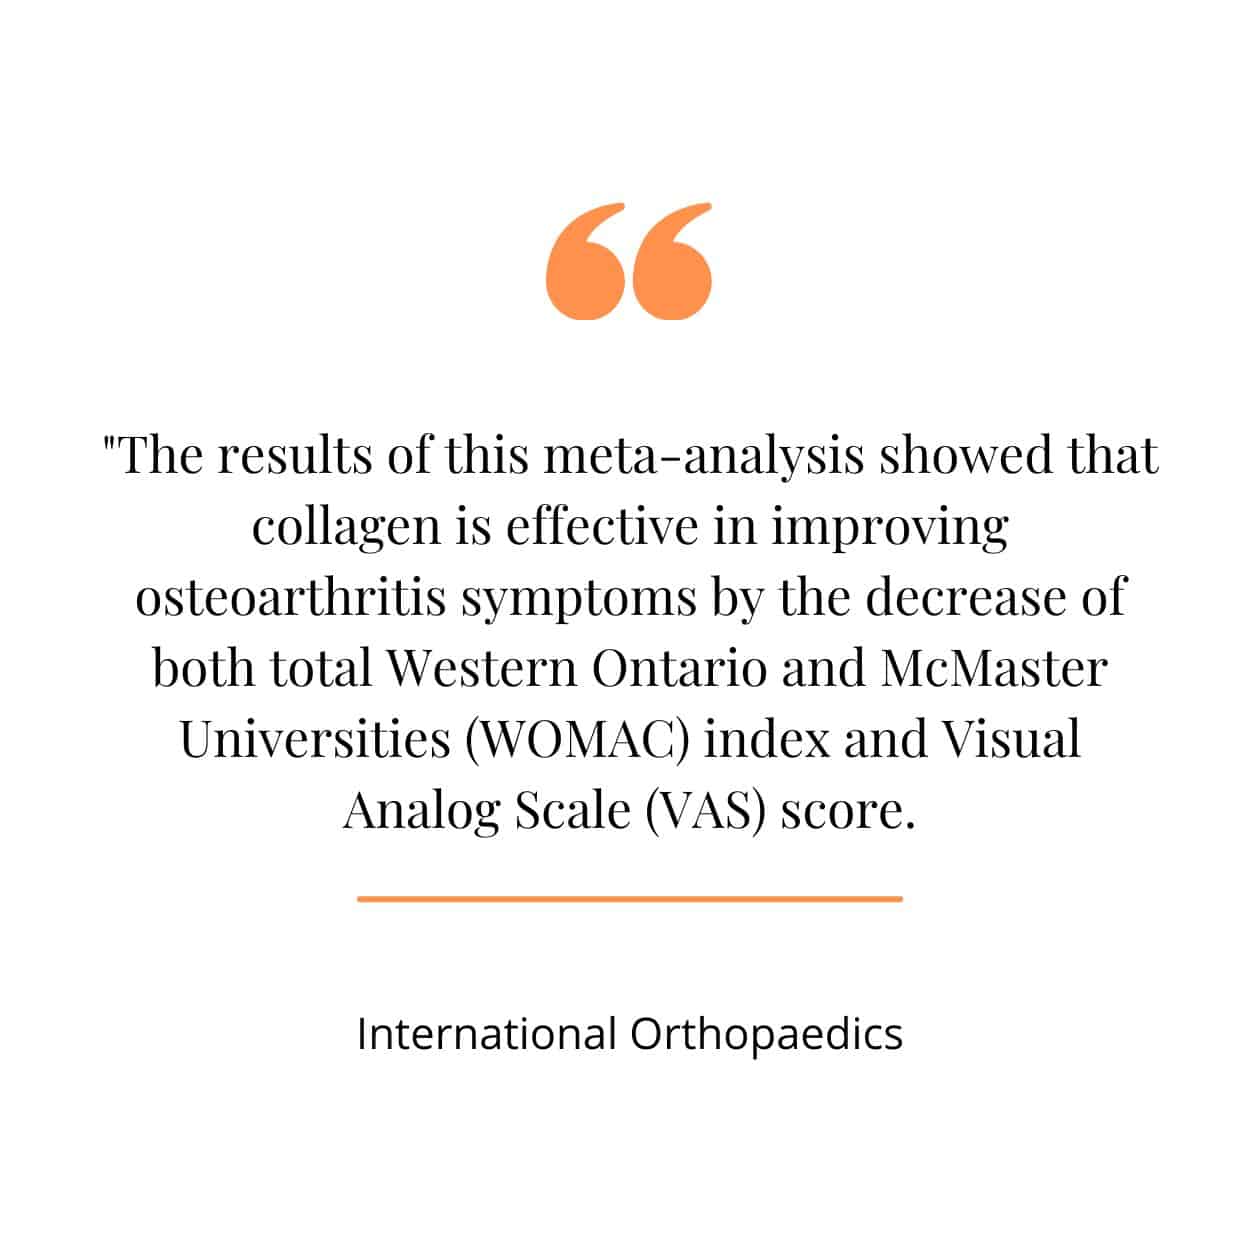 Collagen for osteoarthritis quote from international orthopaedics. 